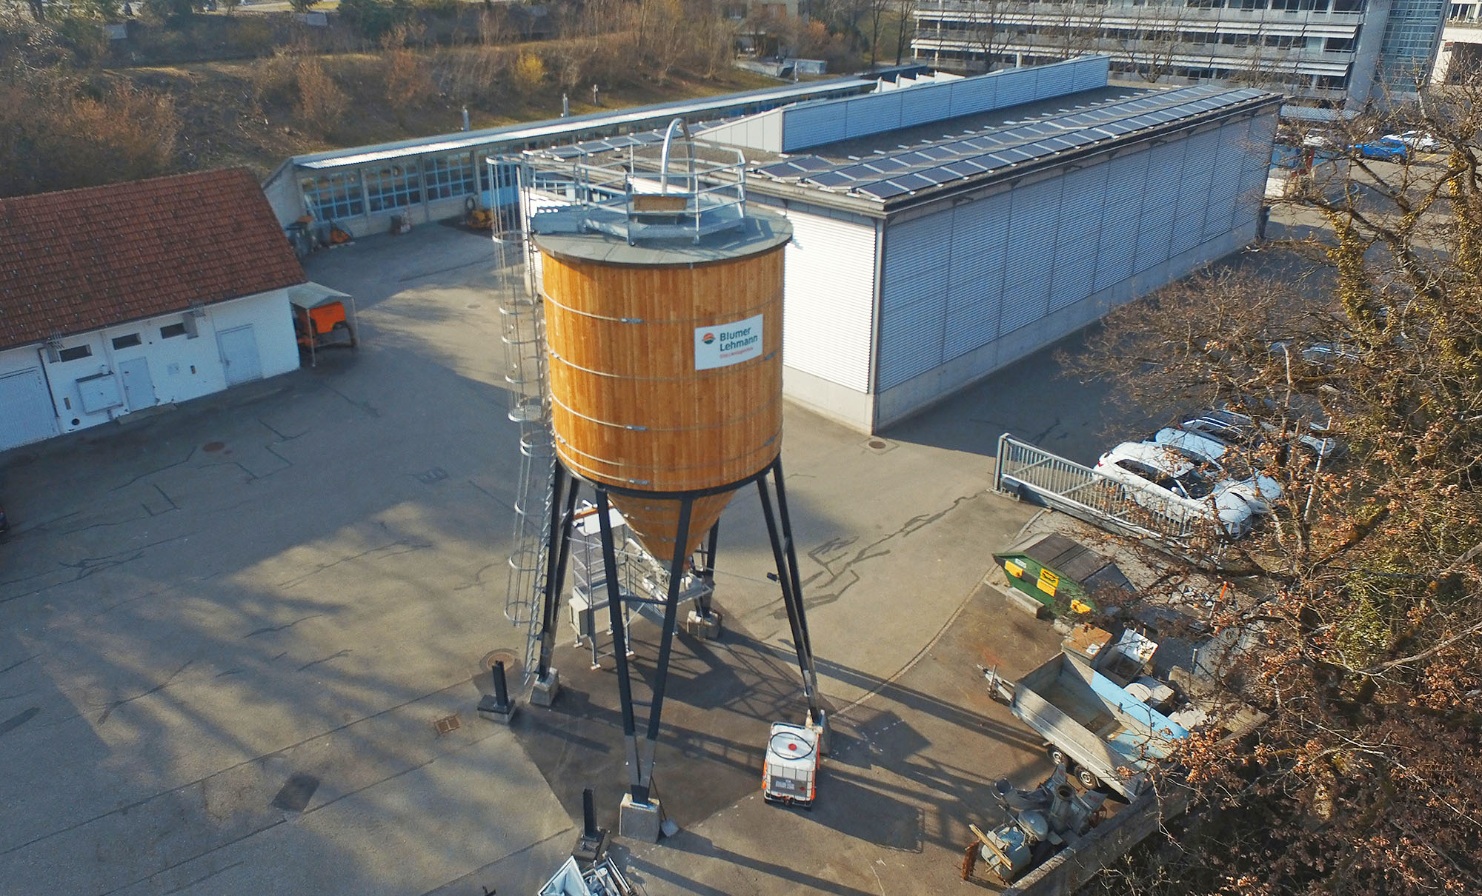 Round wood silo of the municipality of Rüti in Zurich with a capacity of 75m3